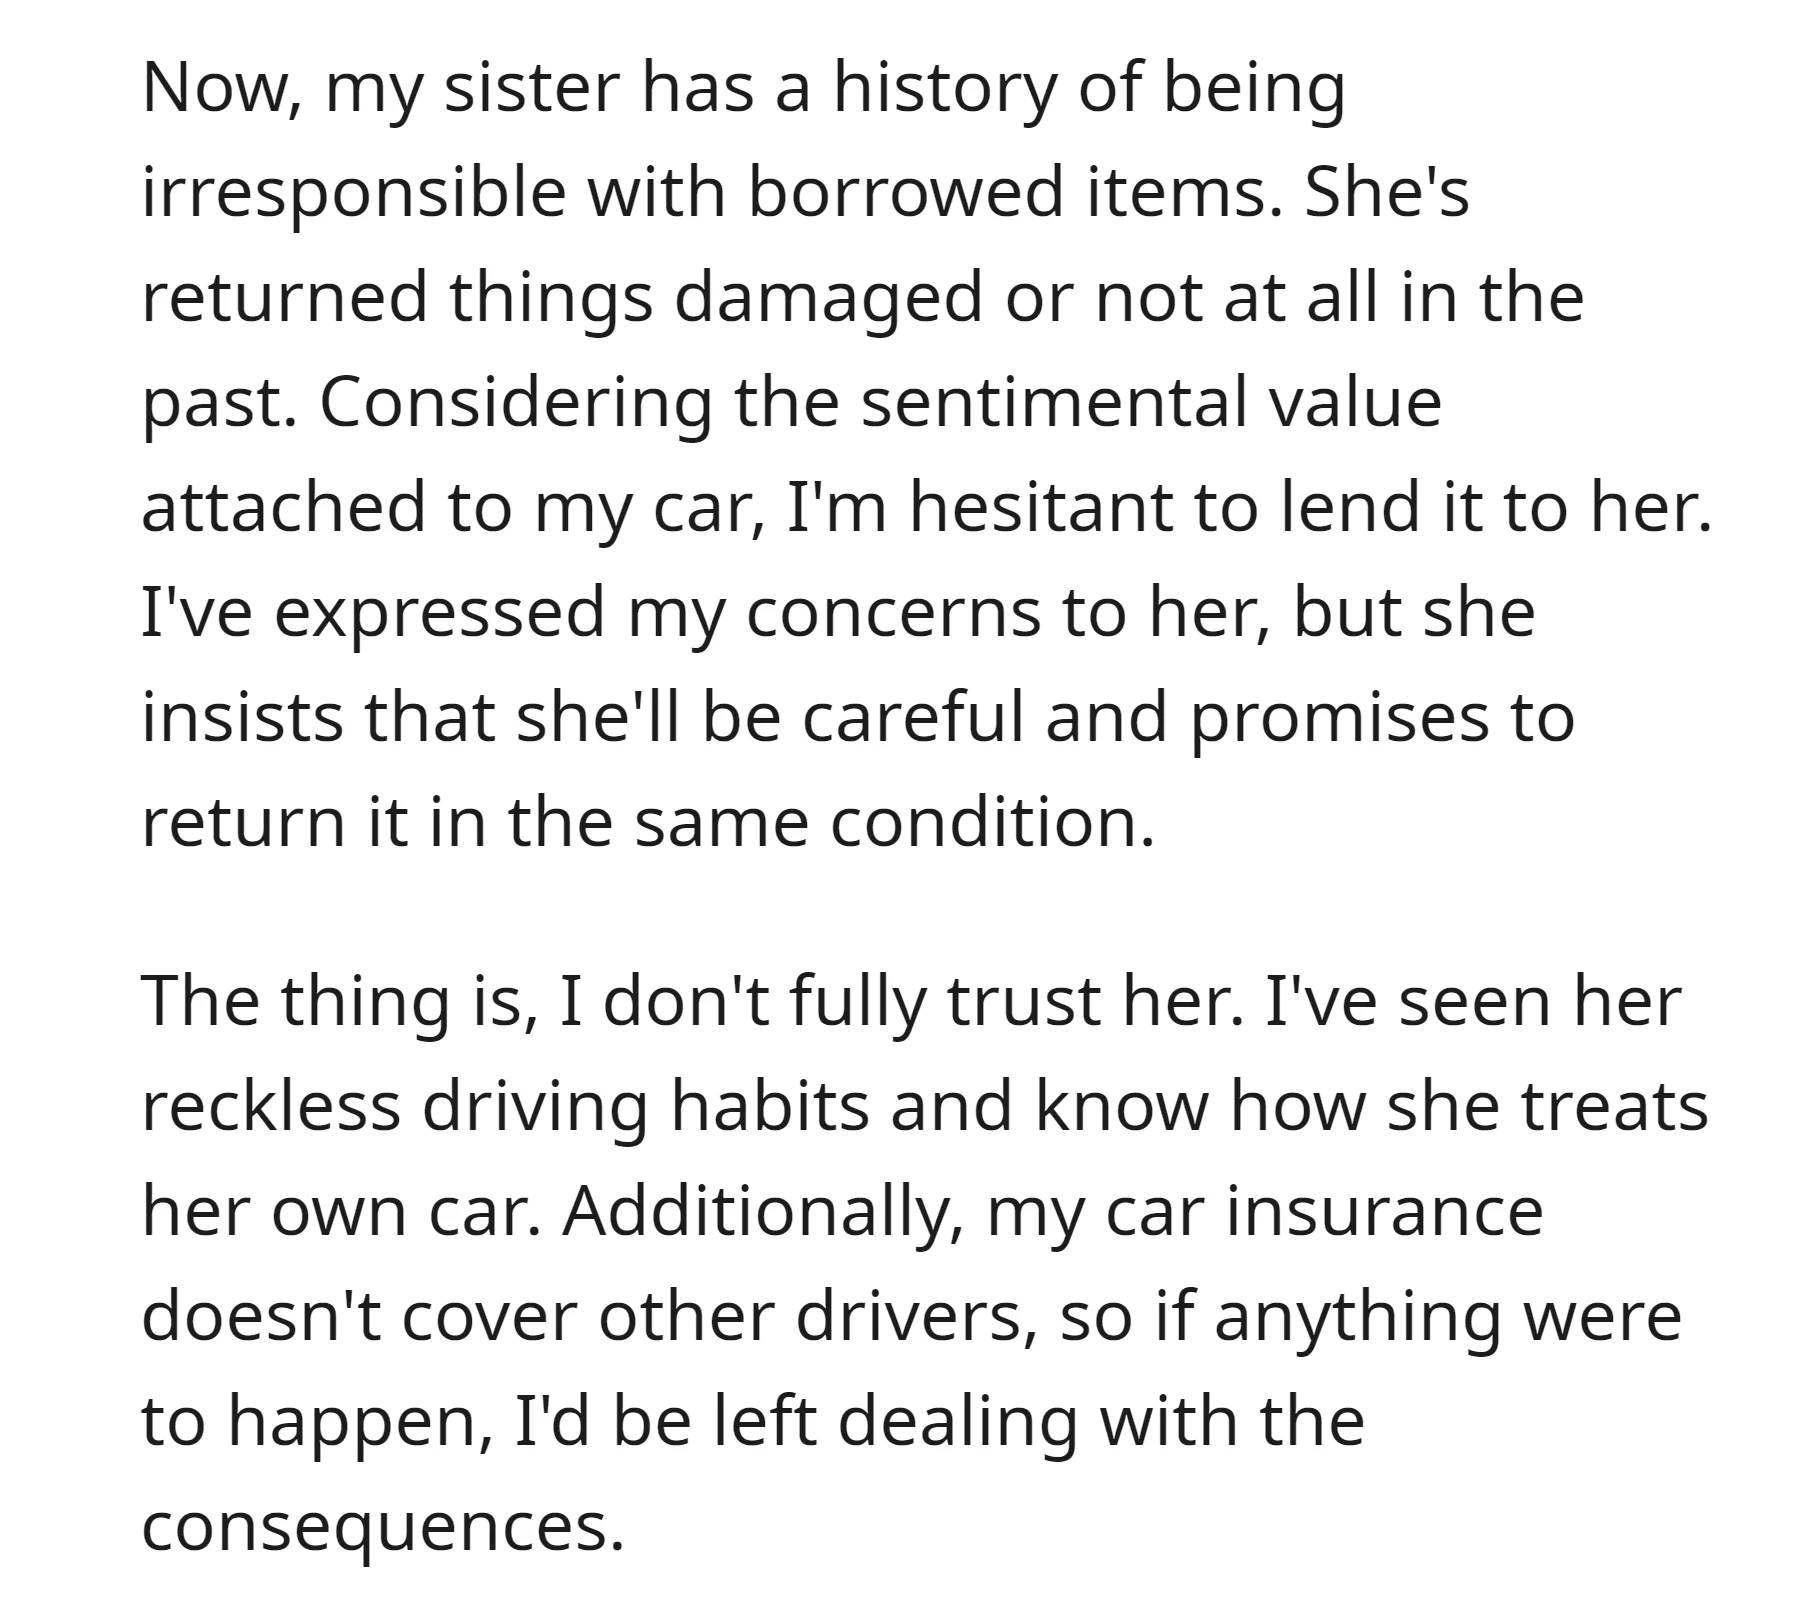 OP is hesitant to lend her car to her sister for a road trip